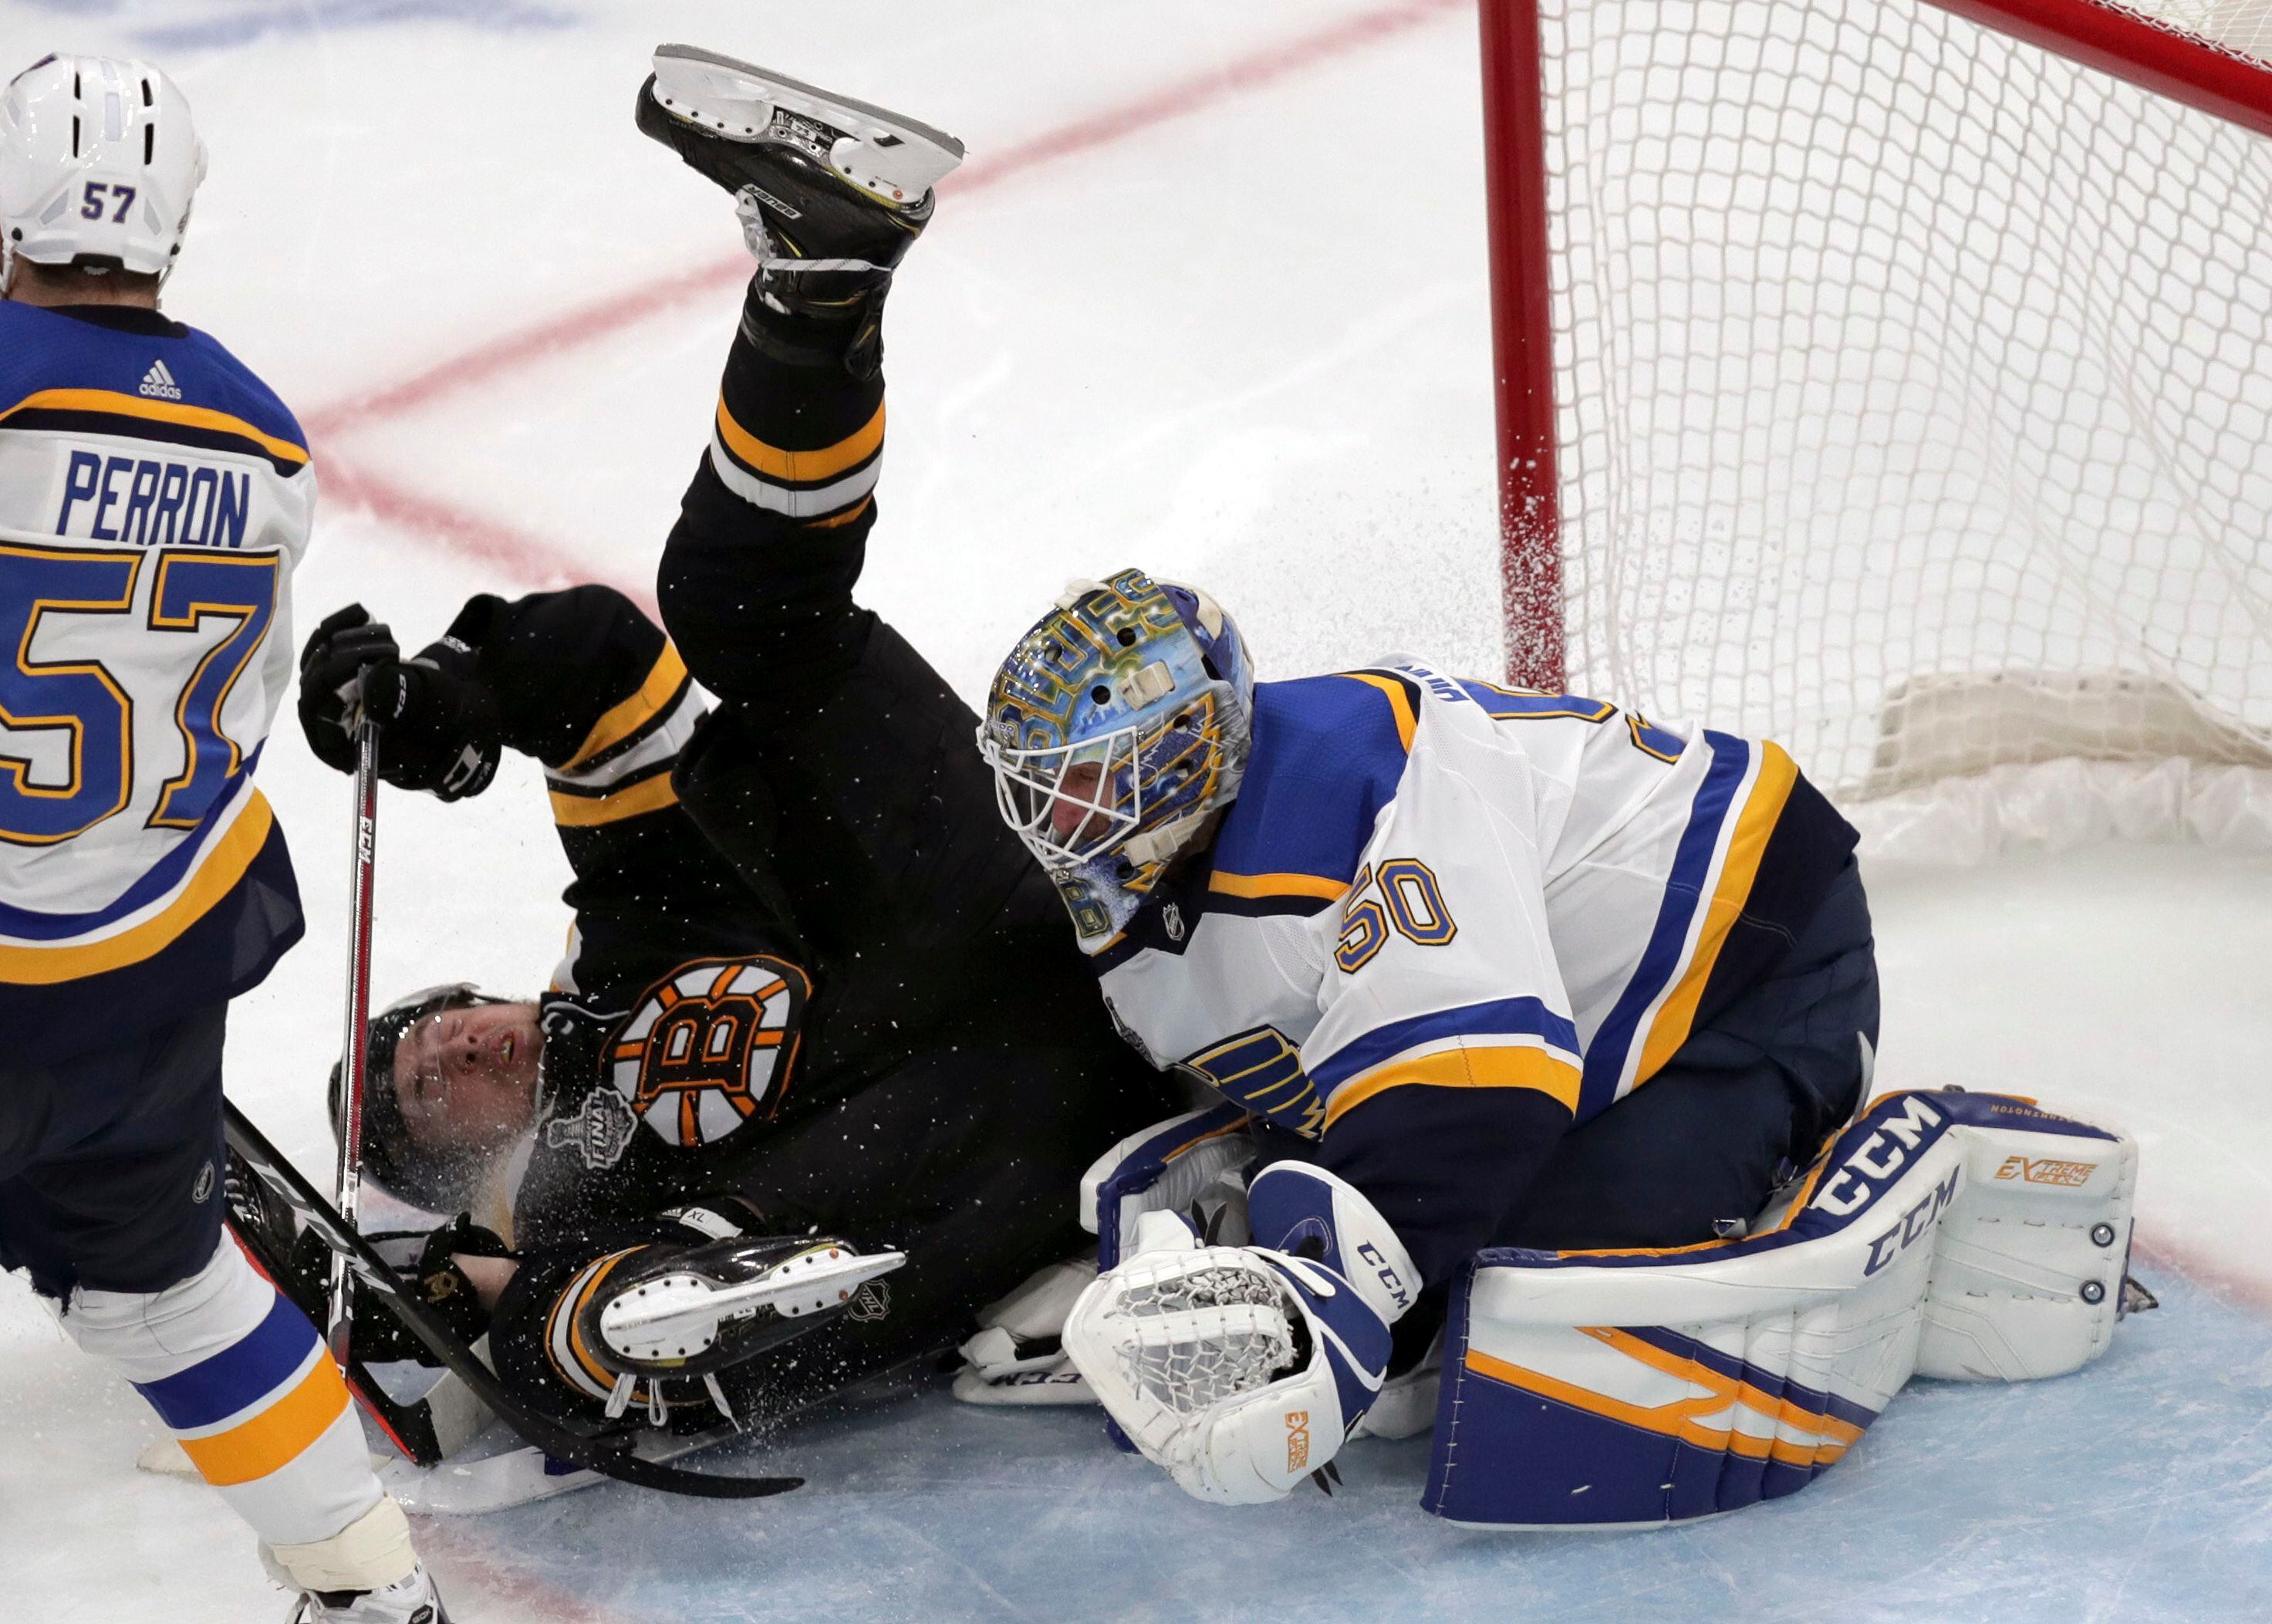 St. Louis Blues beat Boston Bruins, 4-1, to win first Stanley Cup